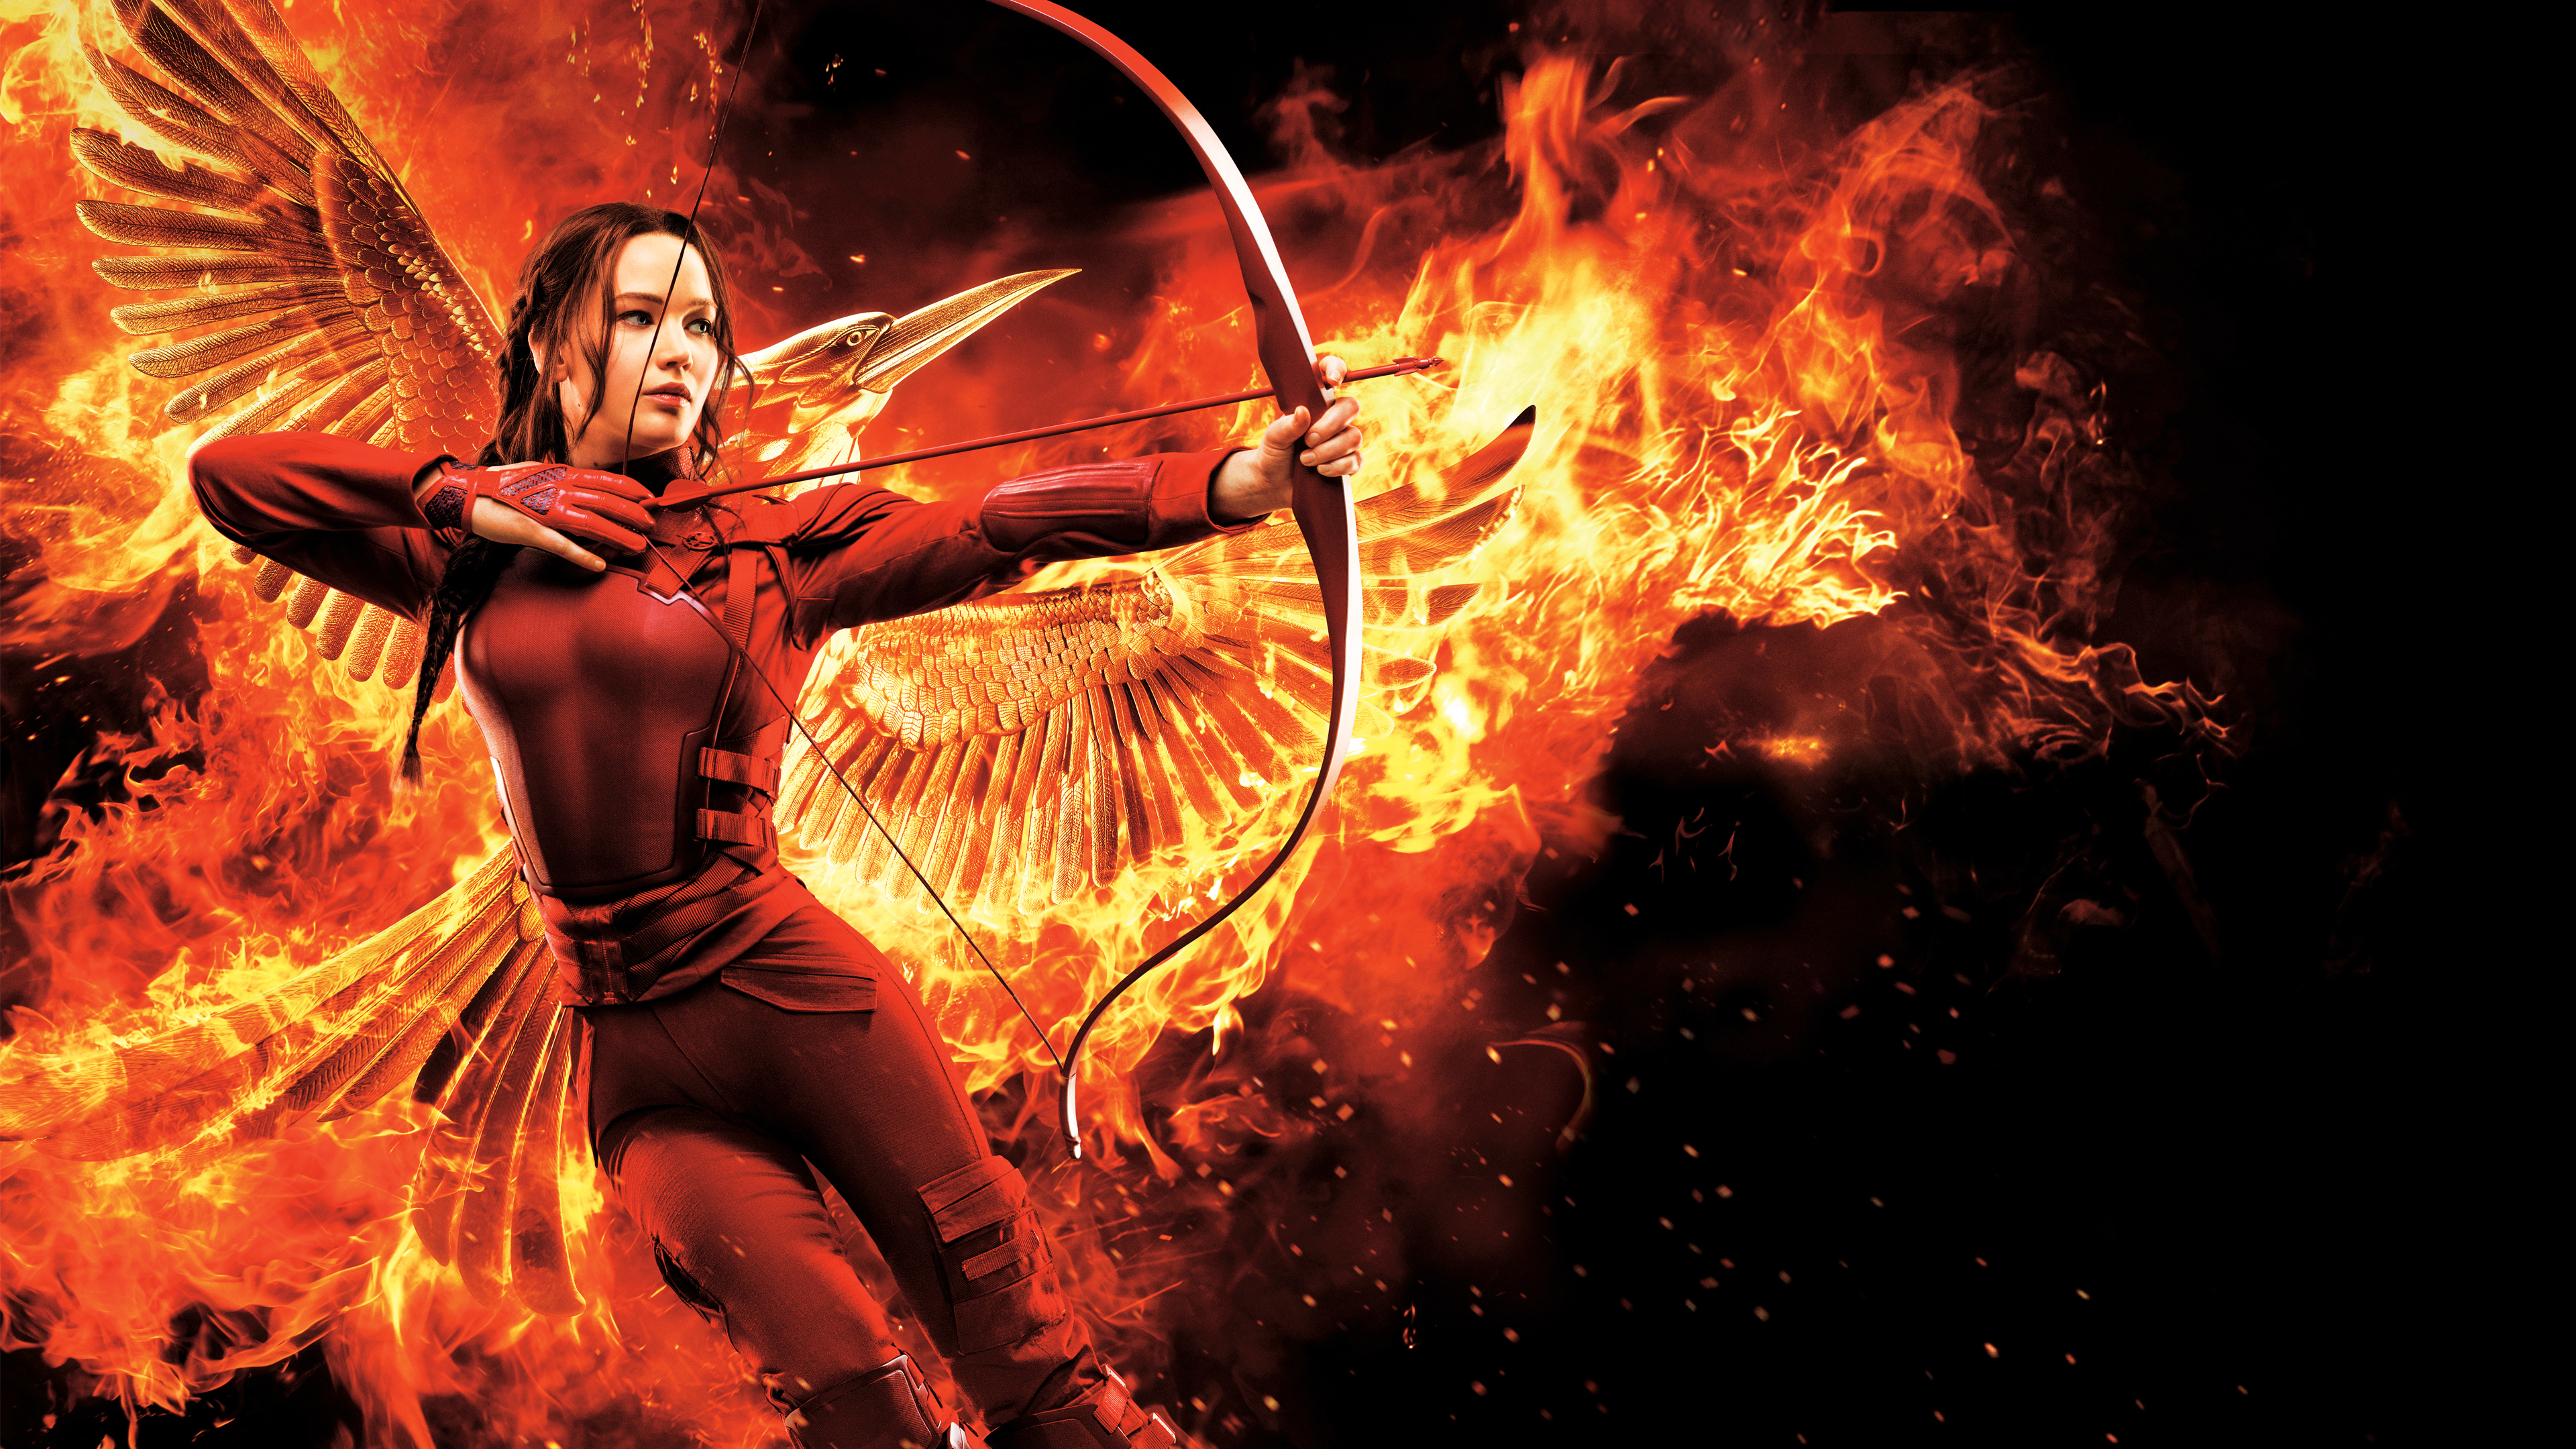 The Hunger Games Mockingjay Part 2 Katniss Wallpapers HD Wallpapers 3840x2160